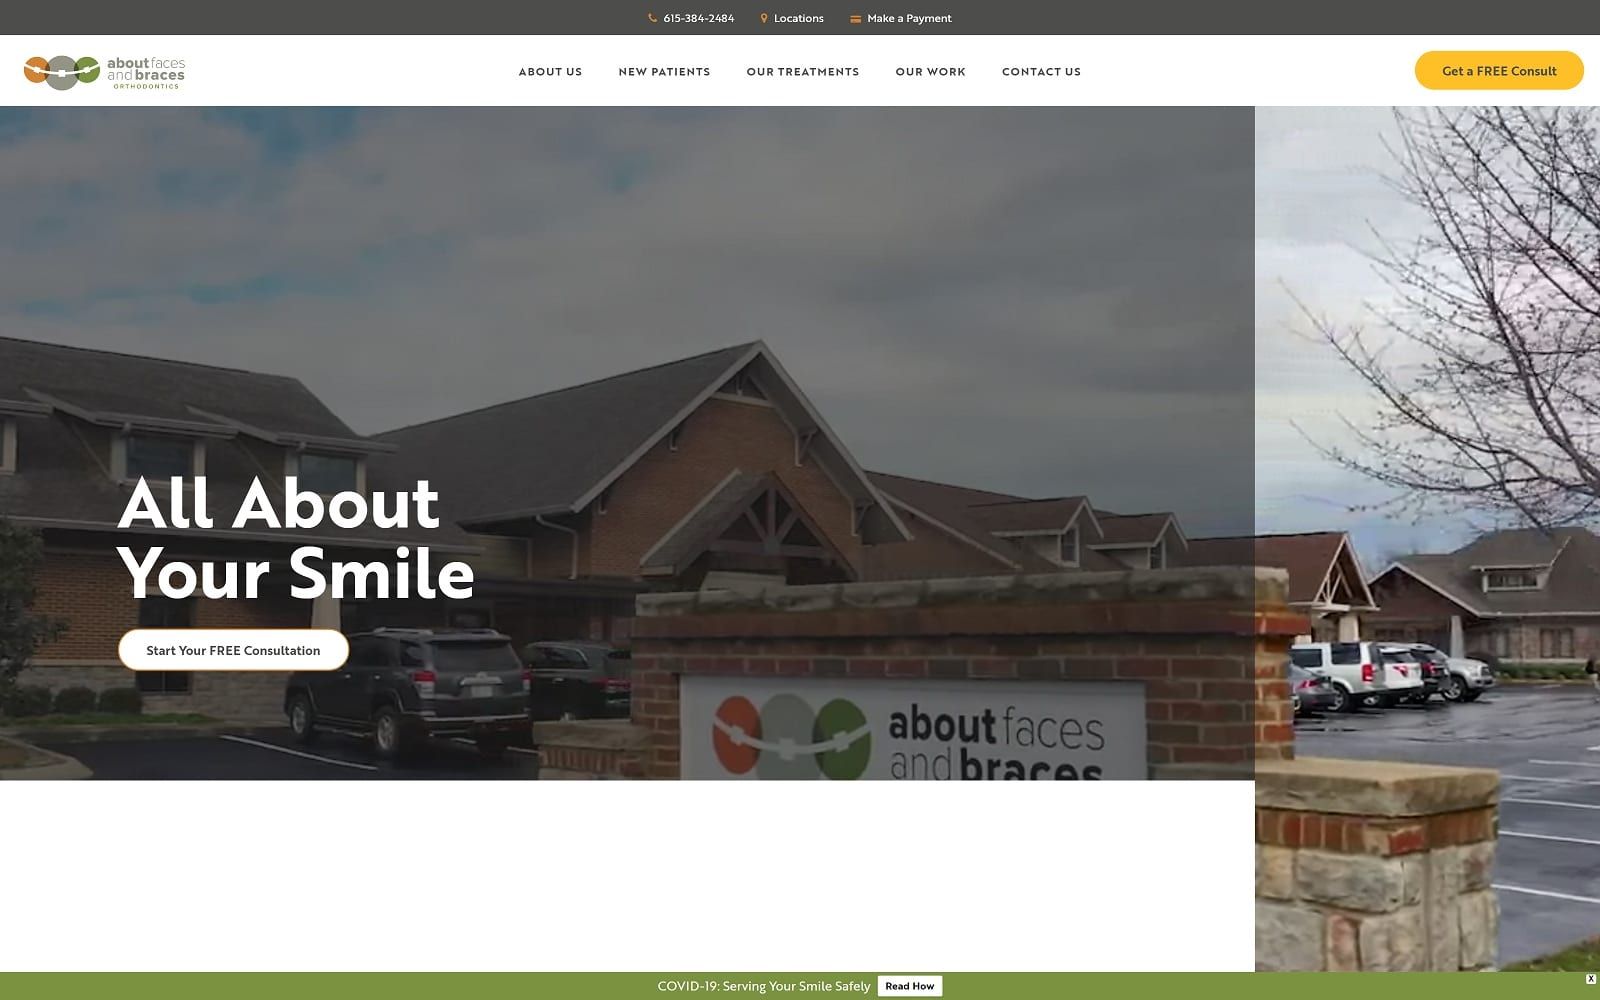 The screenshot of about faces and braces aboutfacesandbraces. Com website